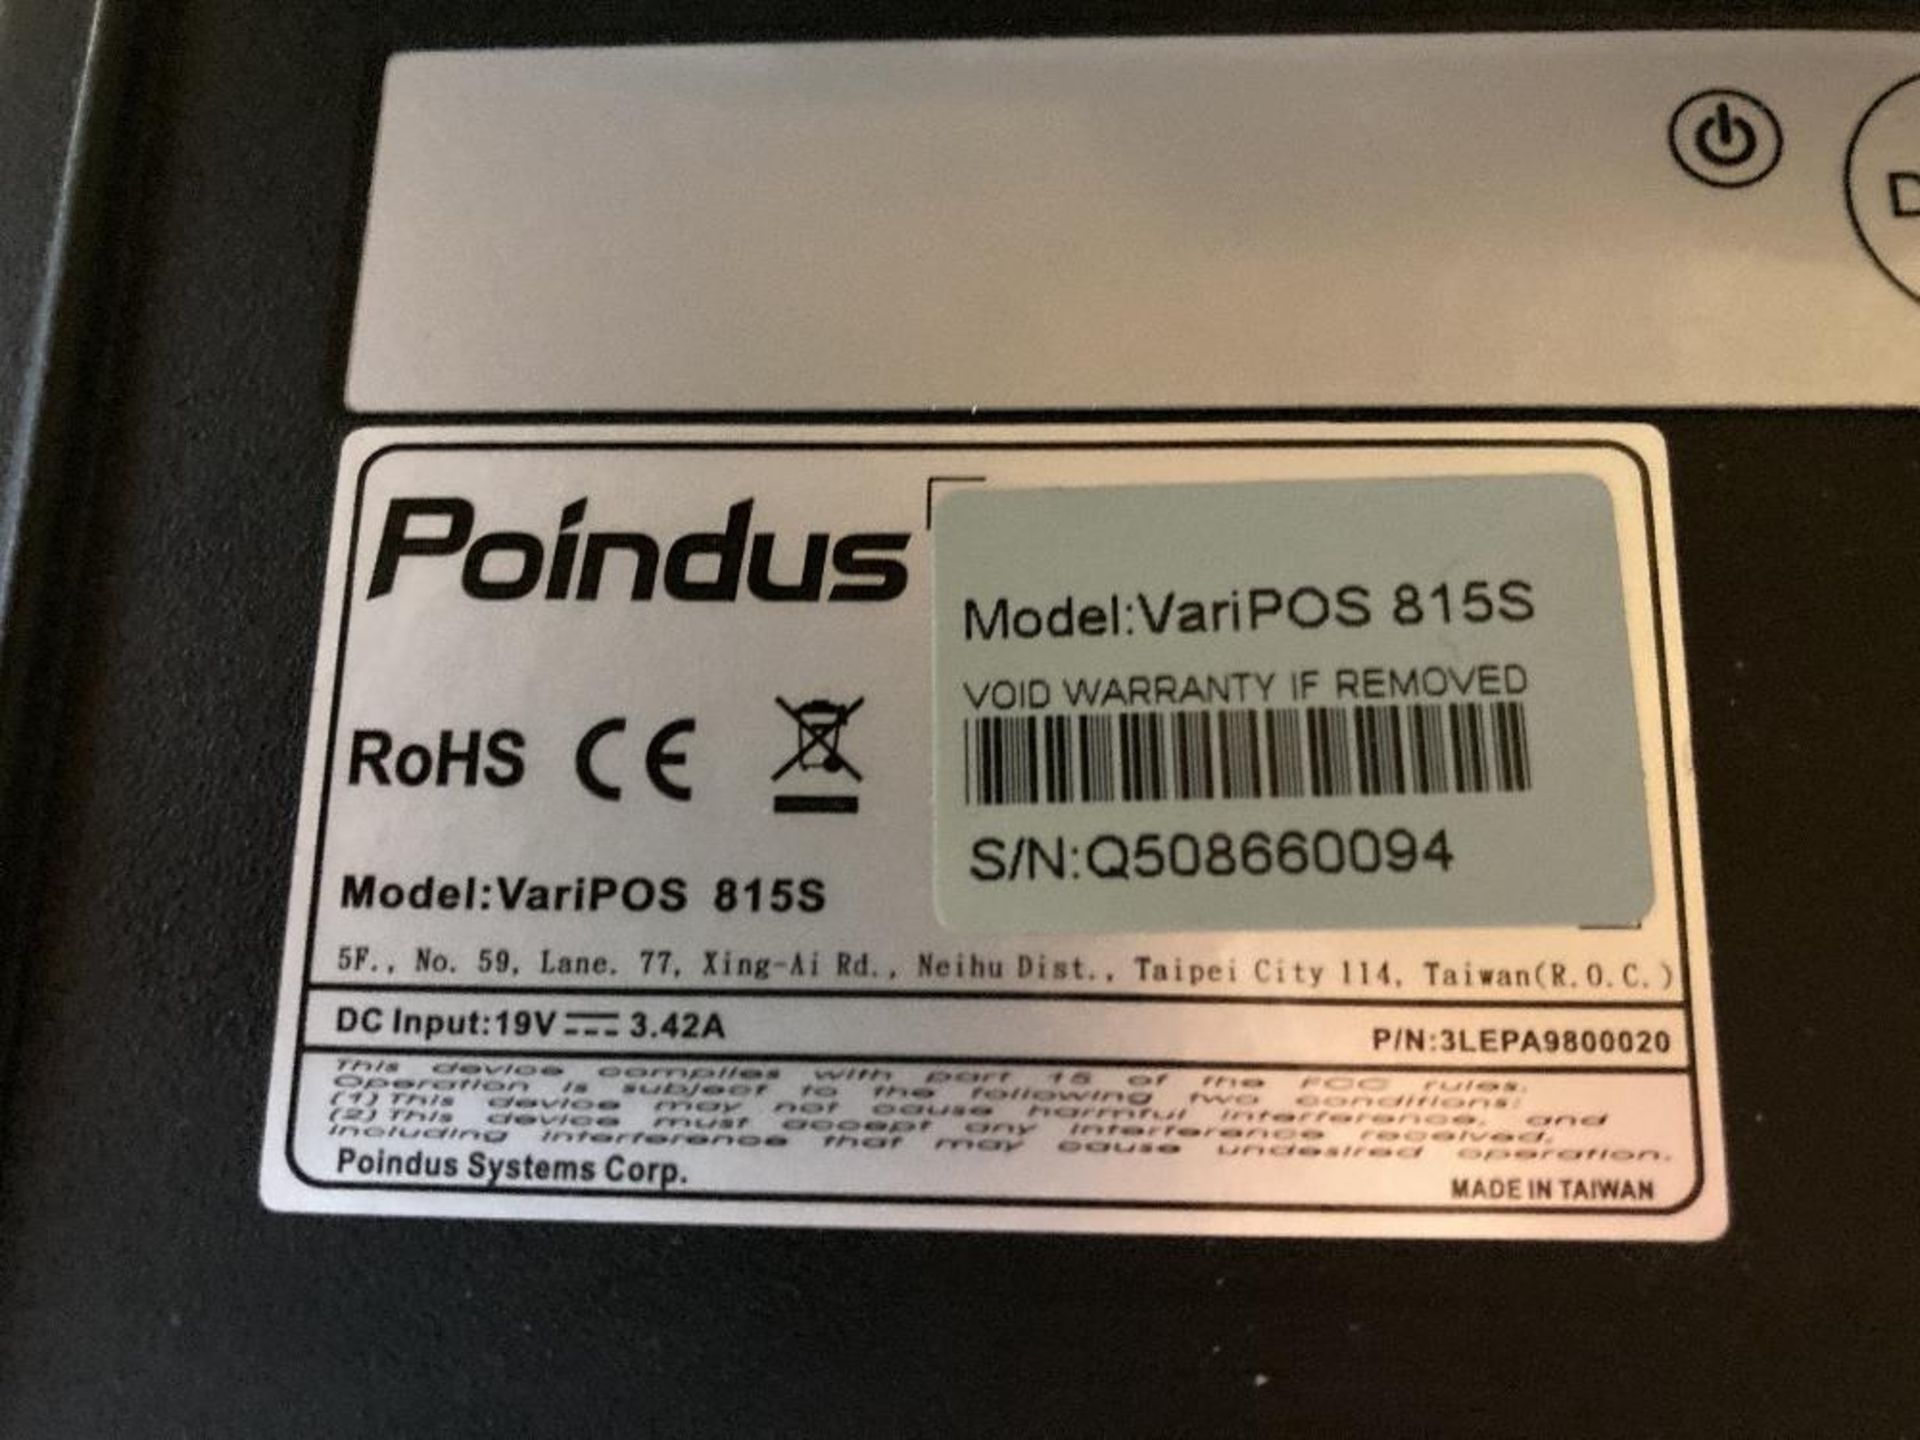 Poindus Varipos 815S EOPS System - Image 4 of 4